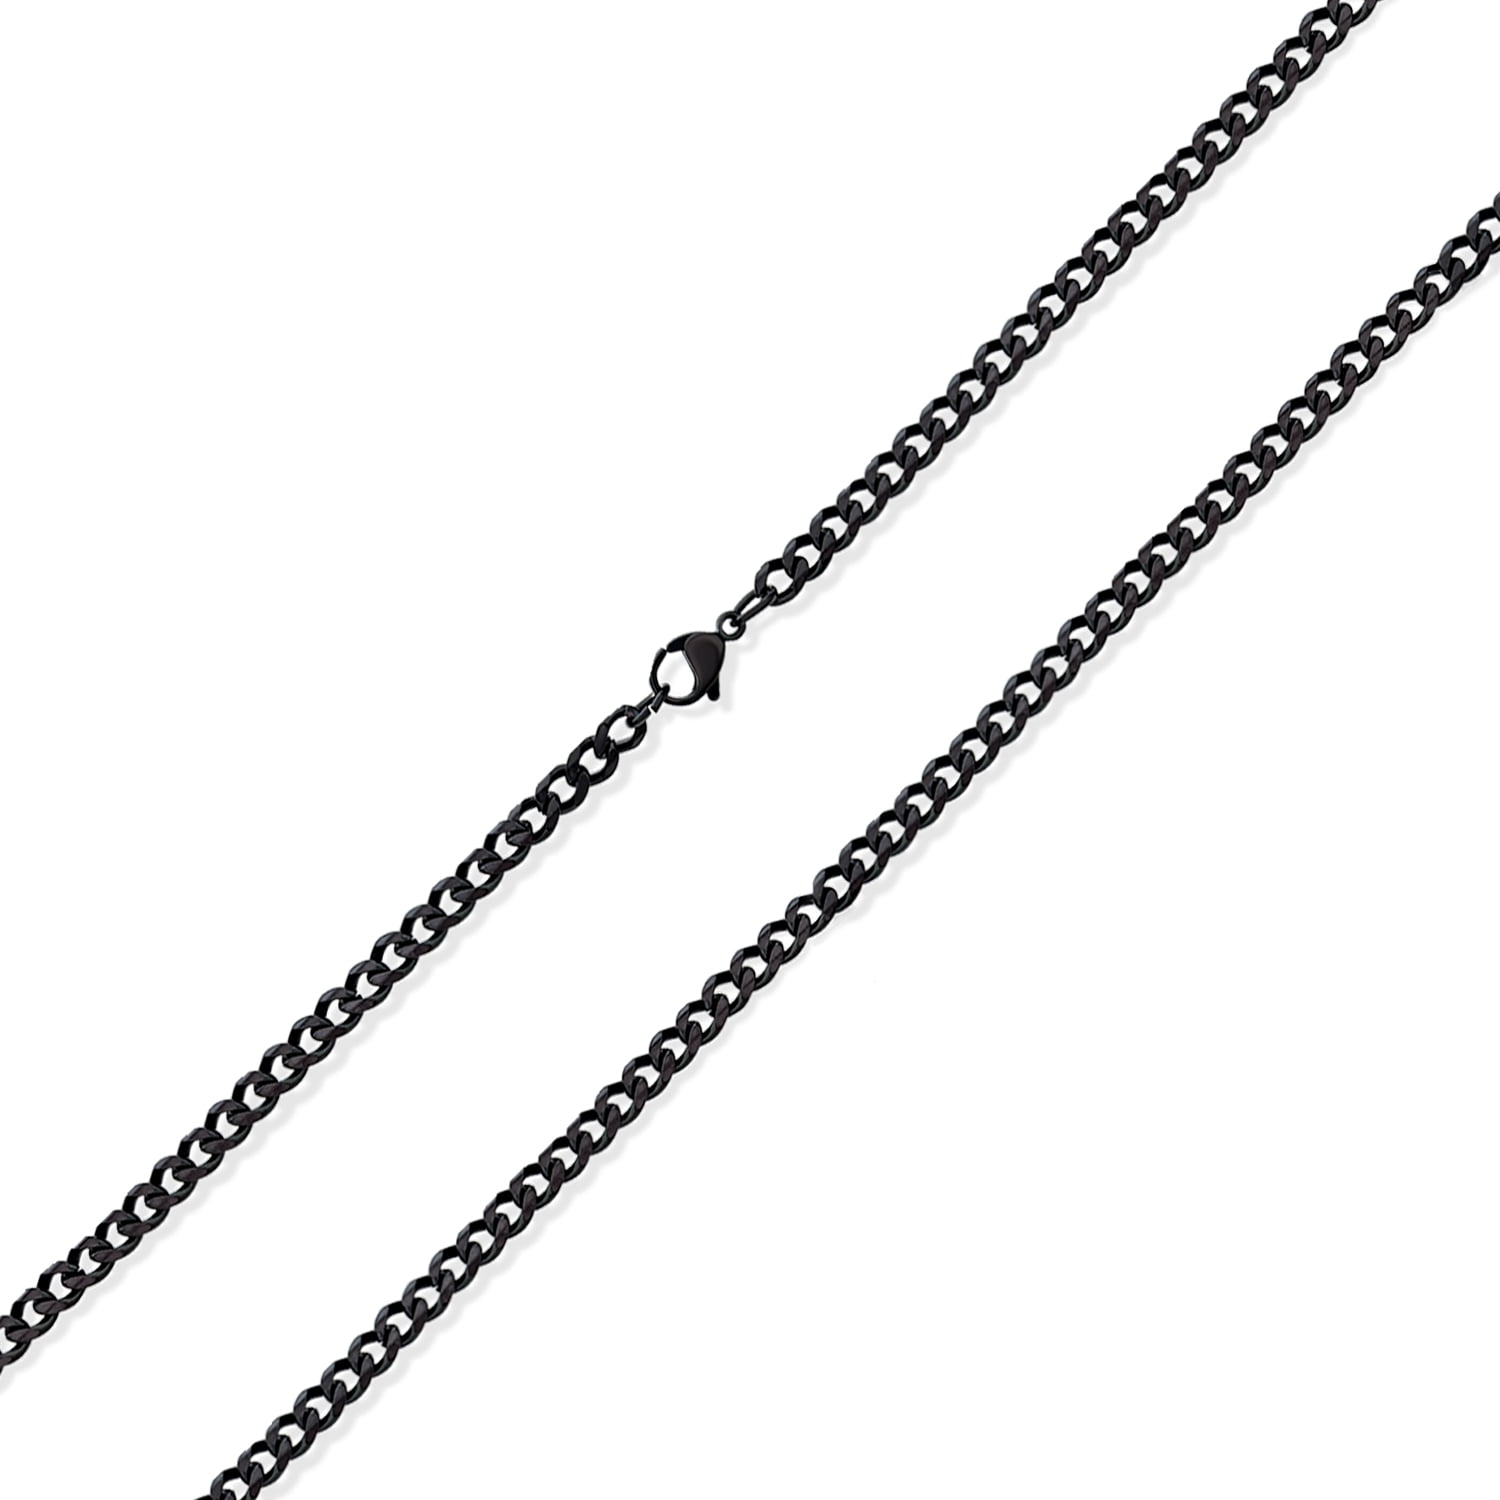 MOWOM Black Chain Necklace for Men Women Boy 316L Stainless Steel Water Resistent Big Thick Cuban Link Chains Plated & Brushed Finish Silver Color with Gift Box 4.6-6.5 MM Wide, 16-36 Inches Long 